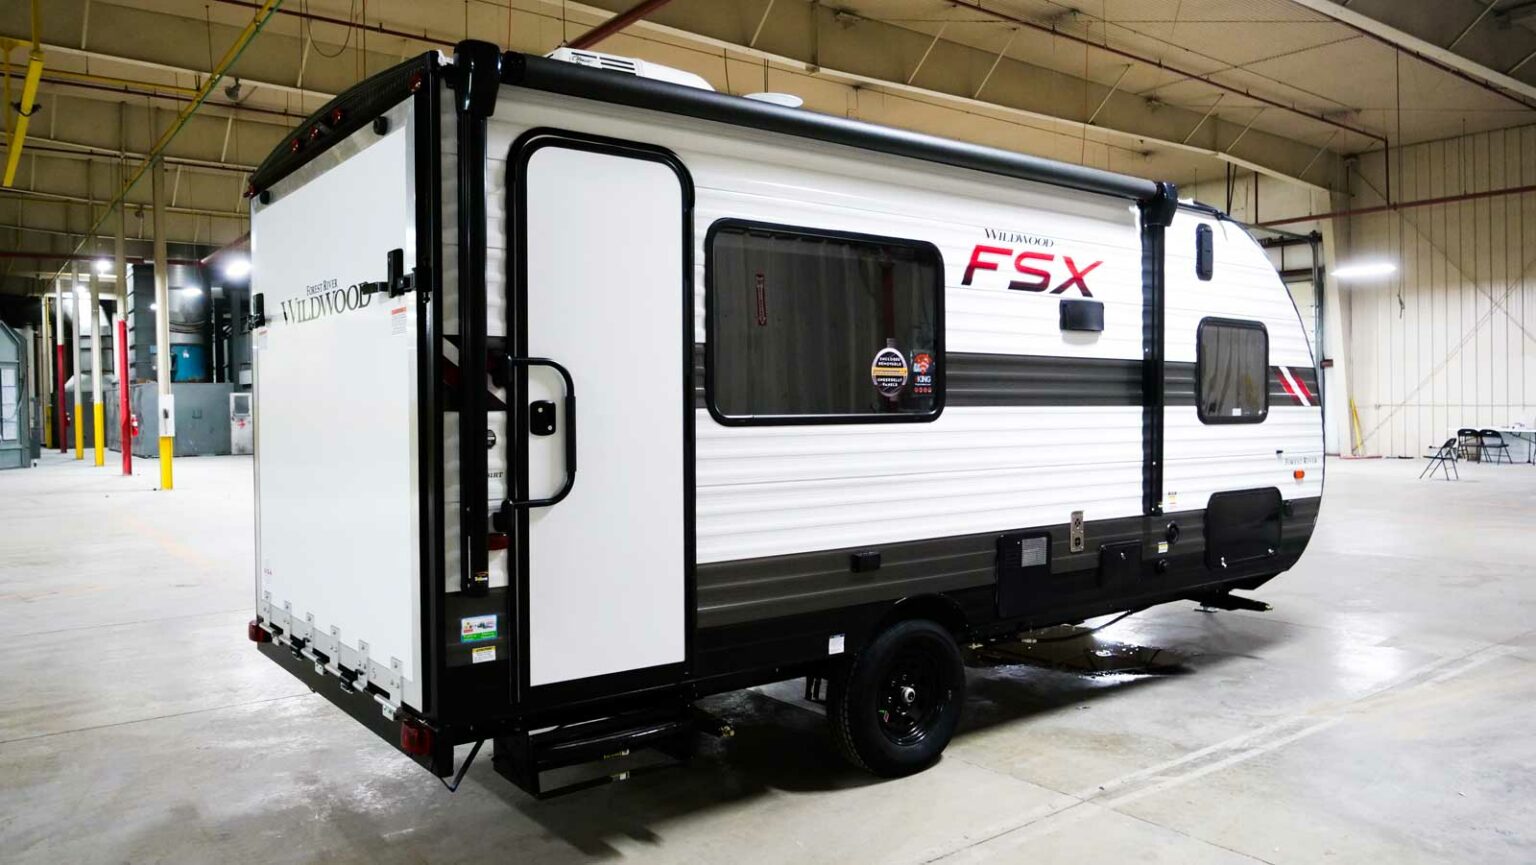 10 Best Small Toy Hauler RVs in 2022 - Getaway Couple